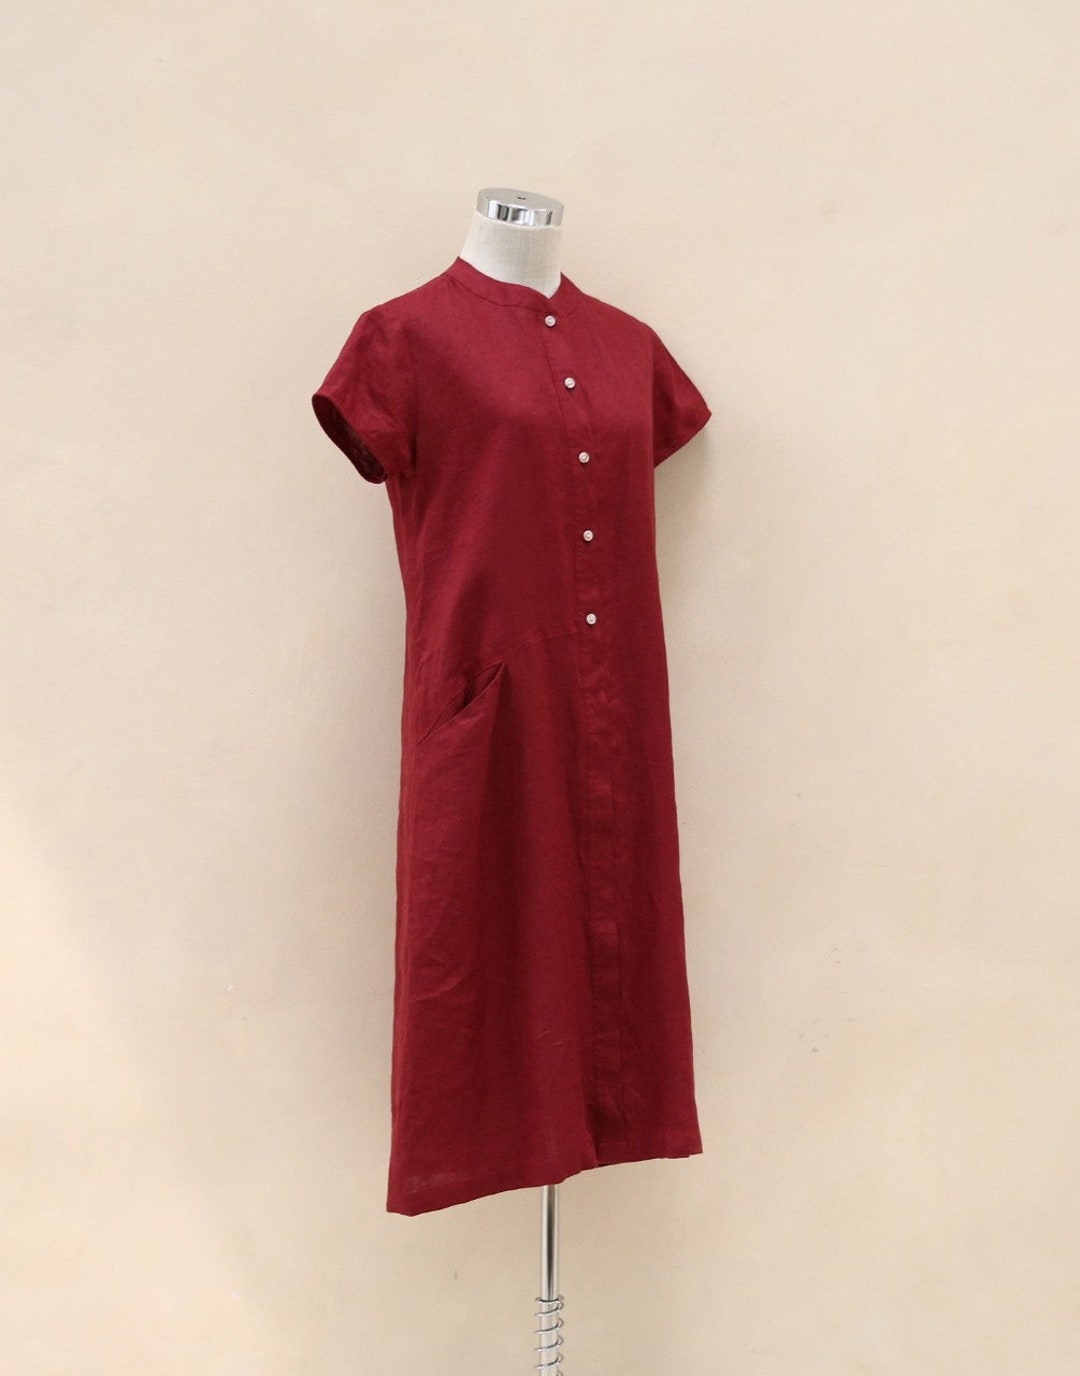 Linen Shirtdress With Pocket ơn One Side - Etsy